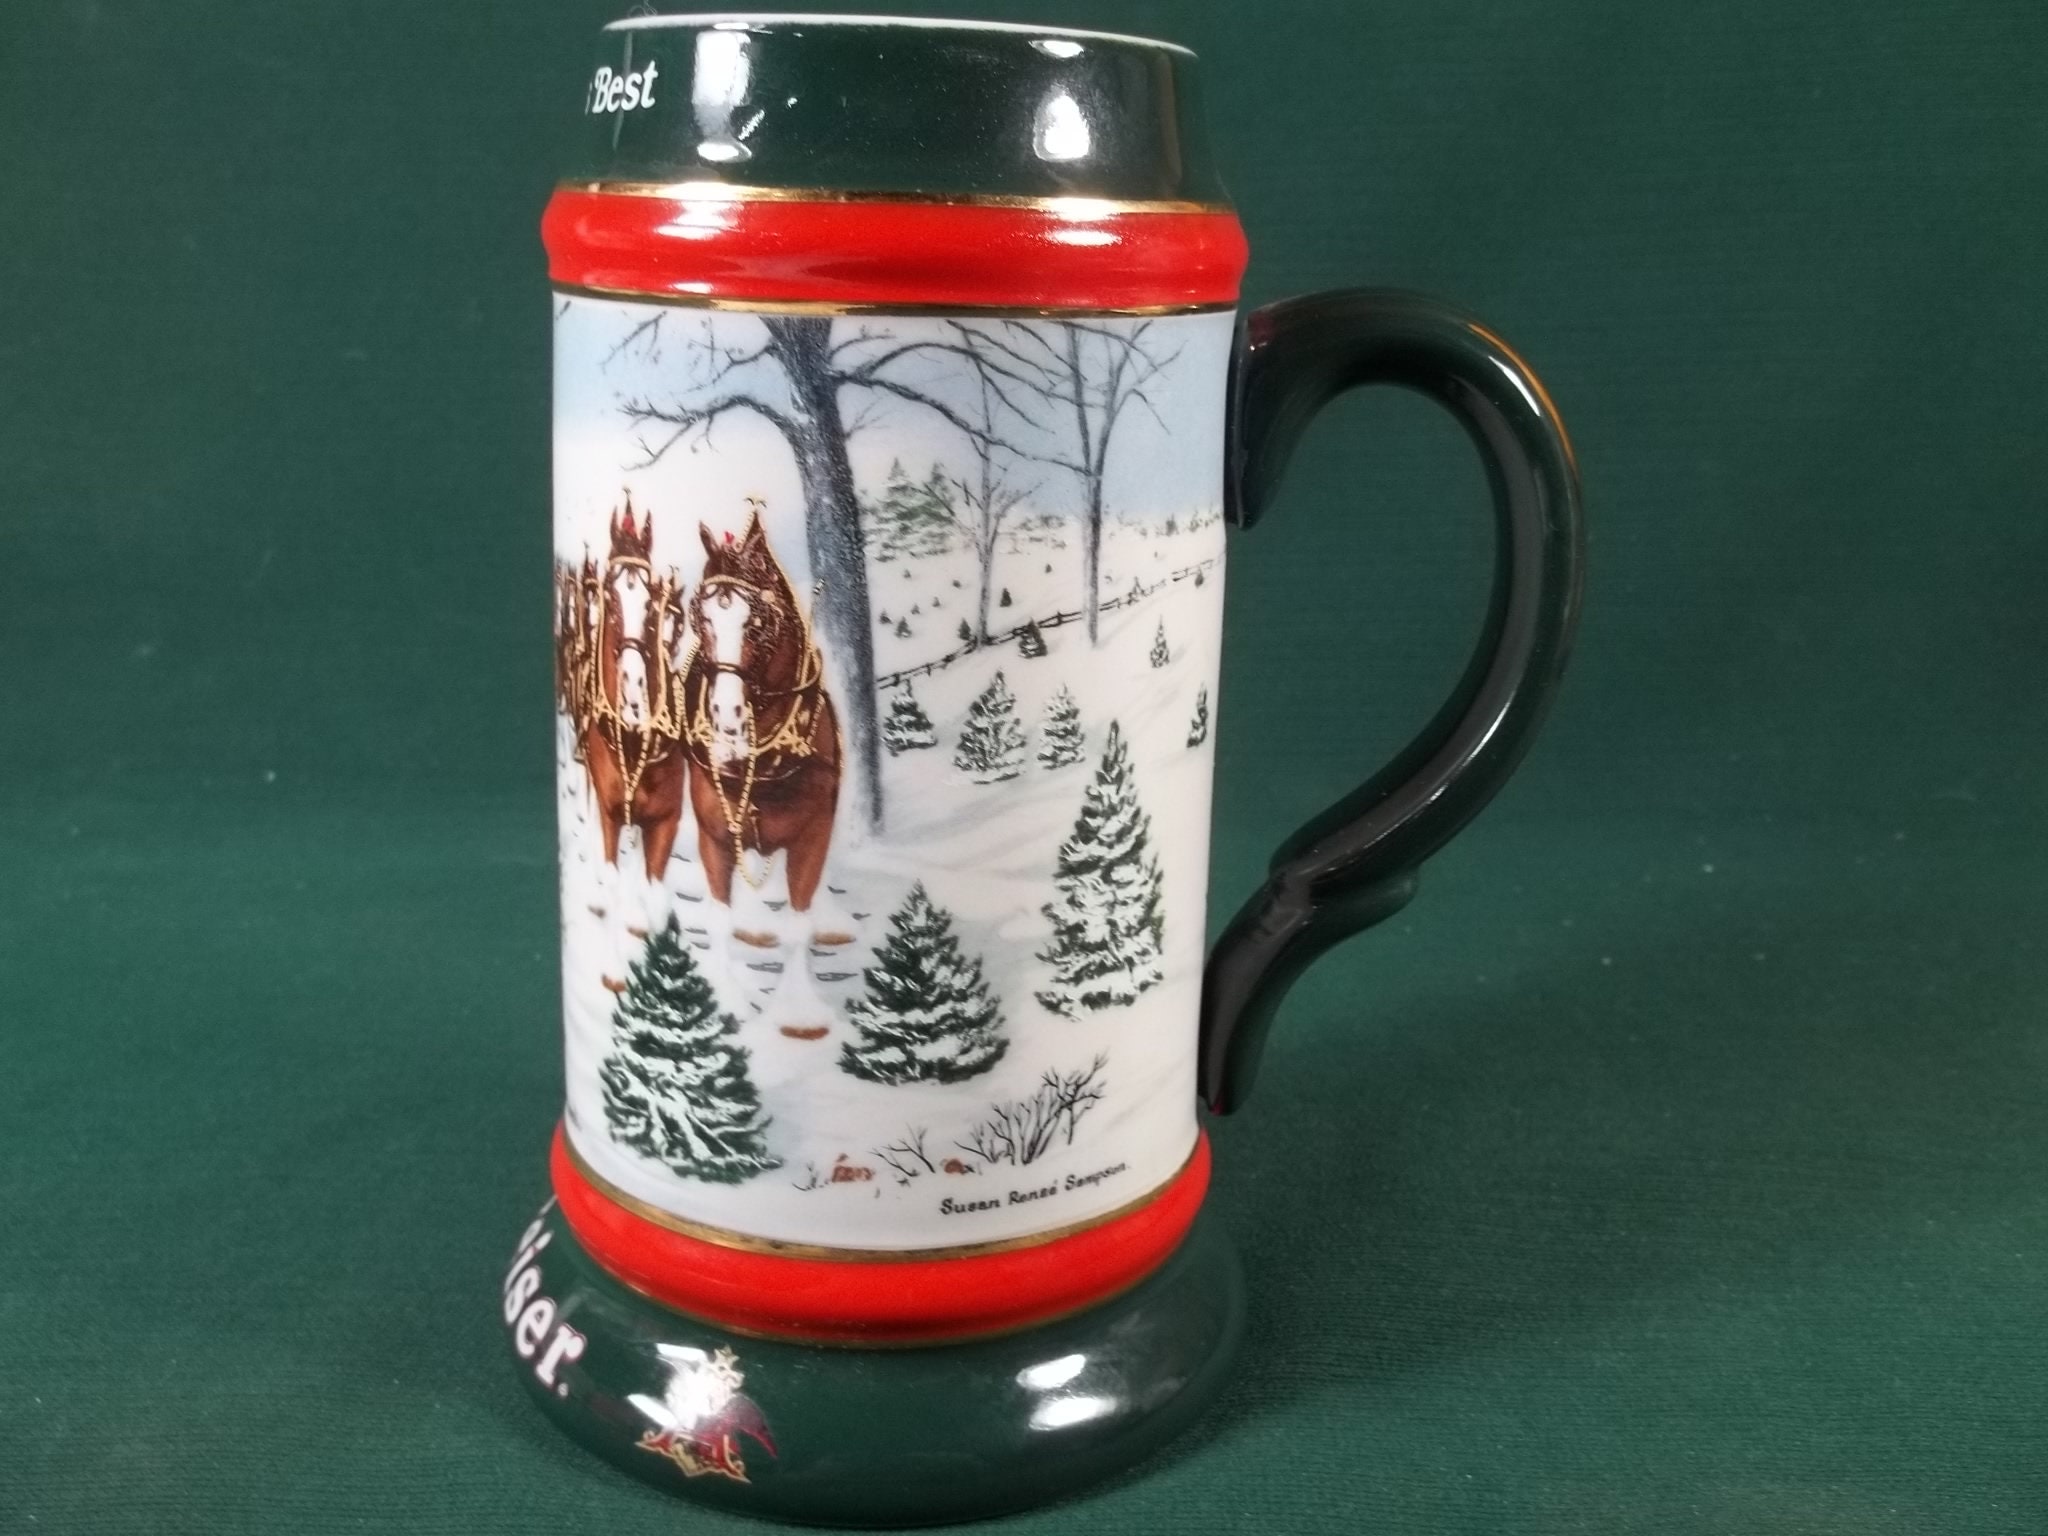 Ceramarte Budweiser King of Beers Clydesdale 8 Horse Hitch Beer Stein Mug 1990 Brazil Perfect Christmas Vintage Old Collectible